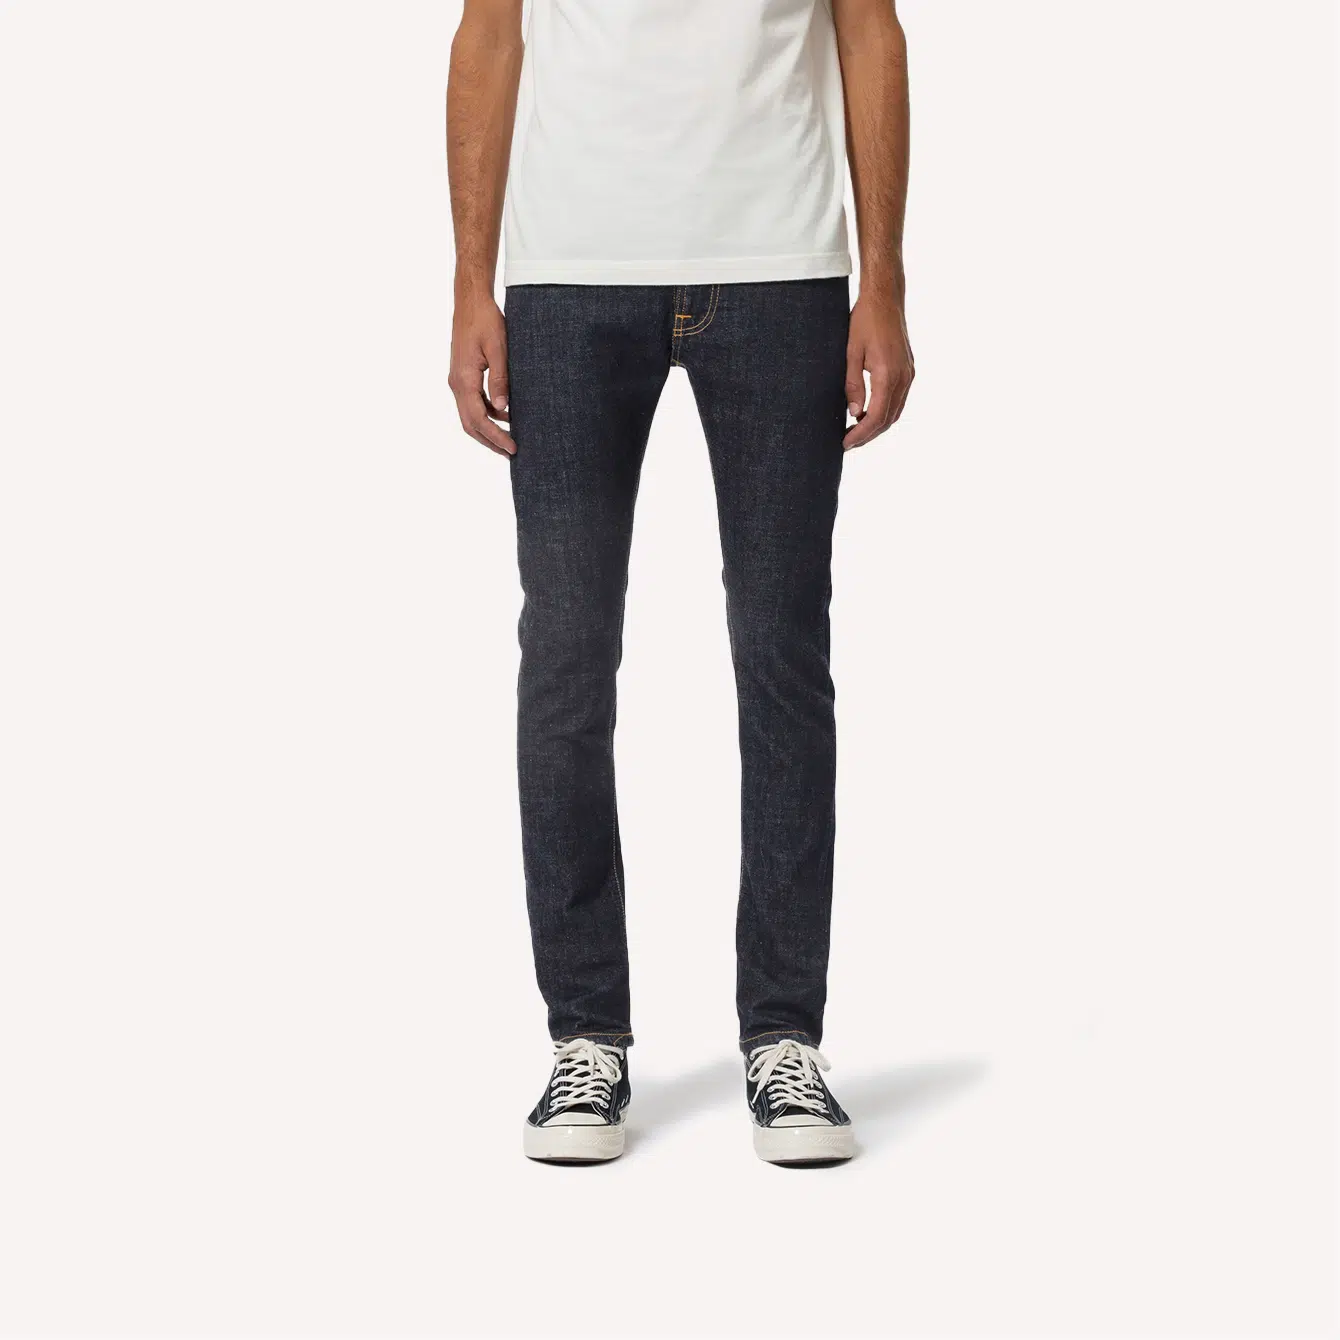 Nudie Jeans Tight Terry Rinse Twill